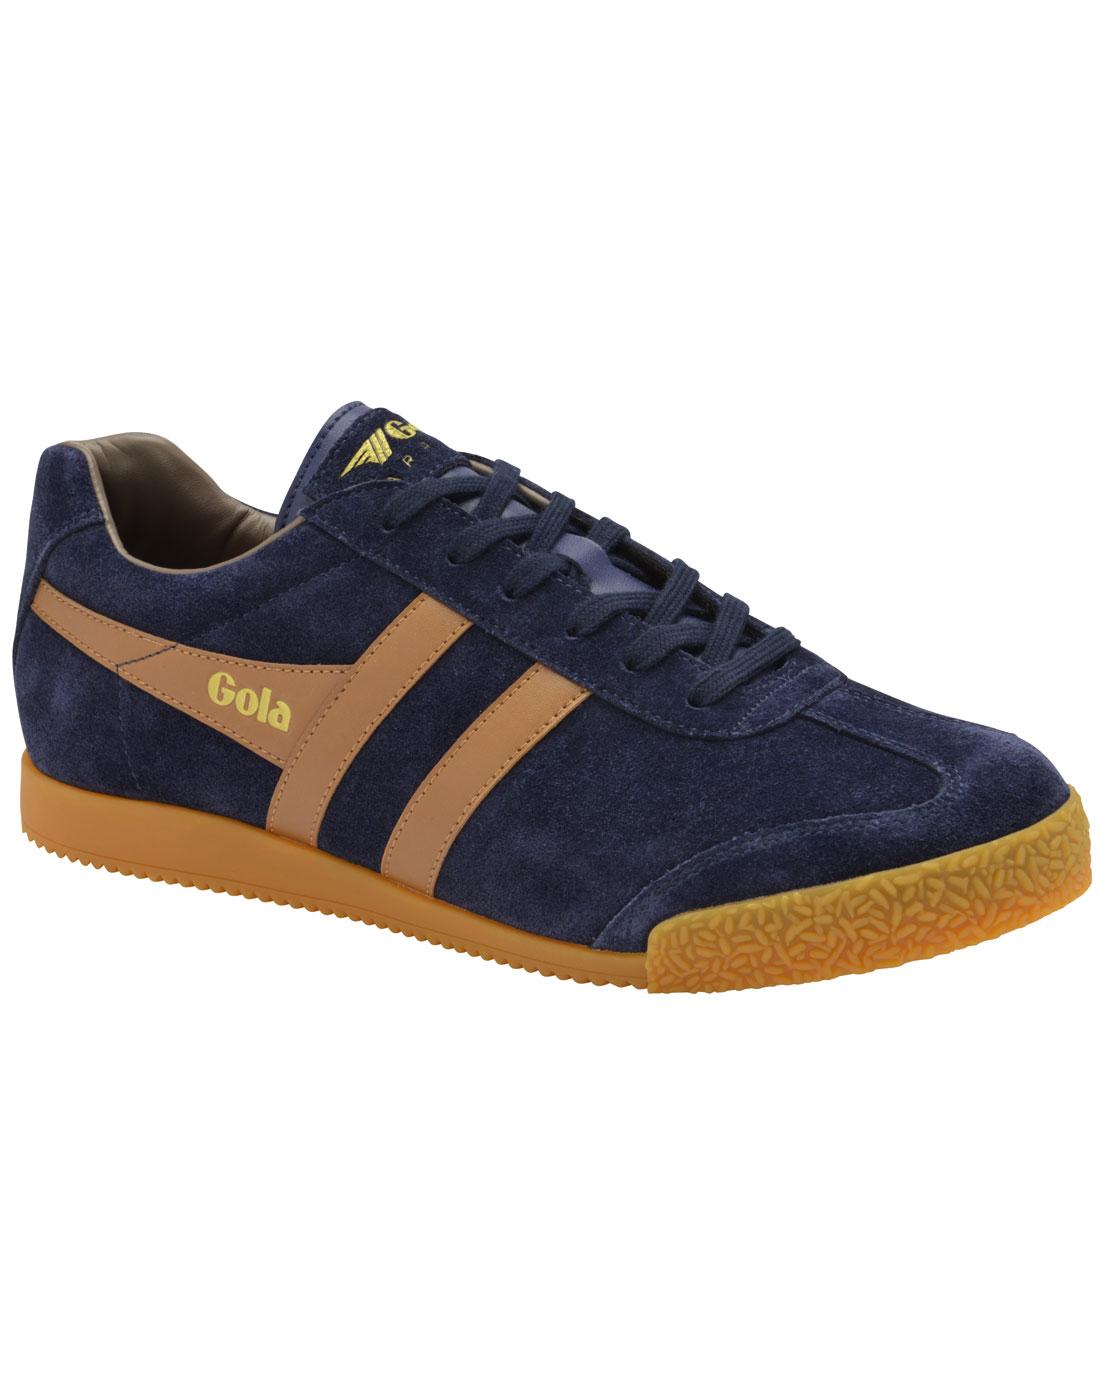 GOLA Harrier Suede Mens Retro 1970s Trainers (NTS)